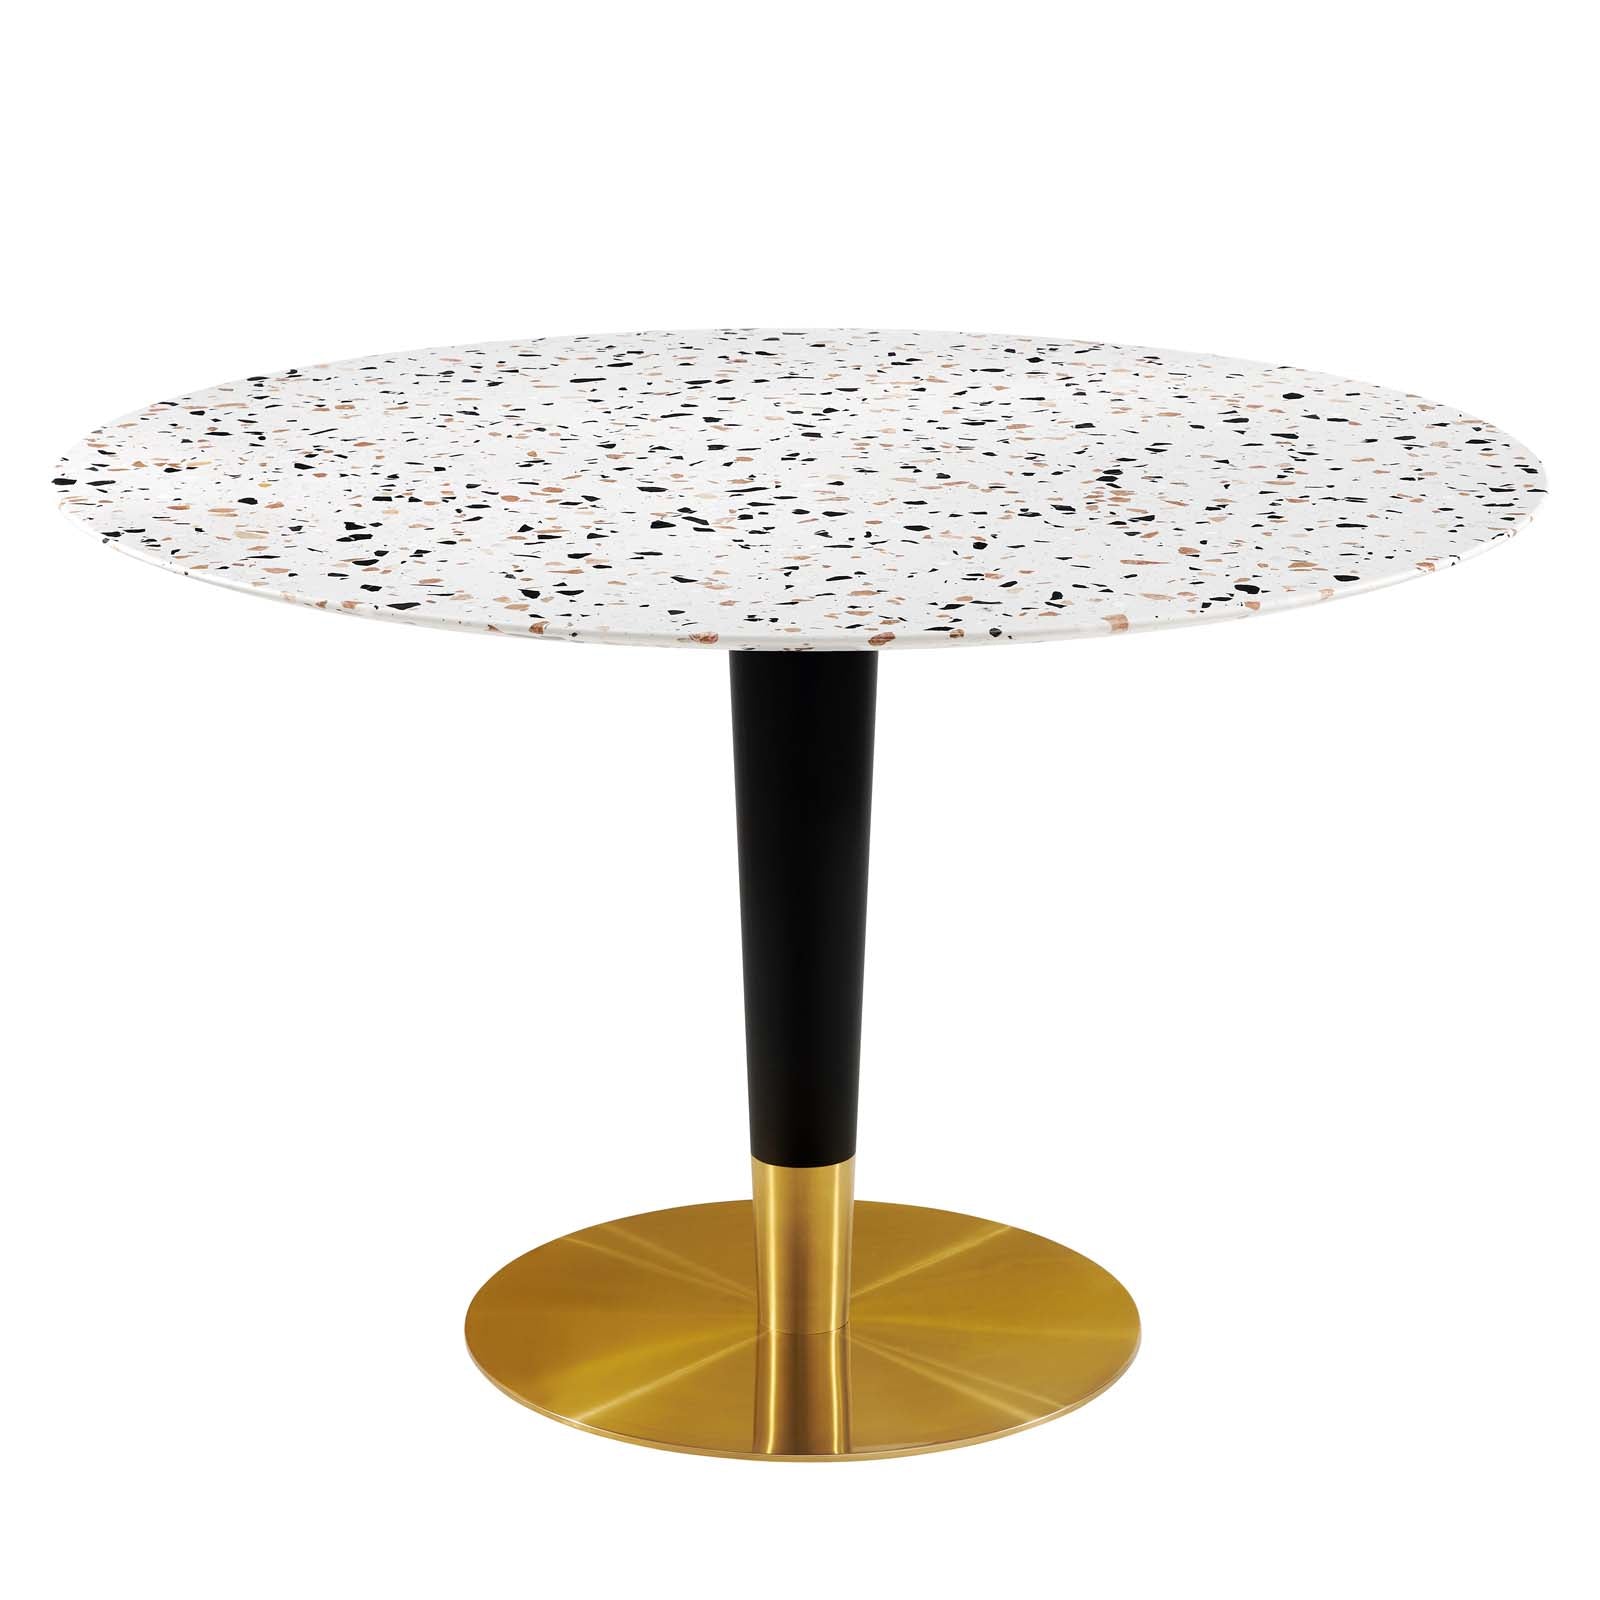 Zinque 47" Round Terrazzo Dining Table - East Shore Modern Home Furnishings